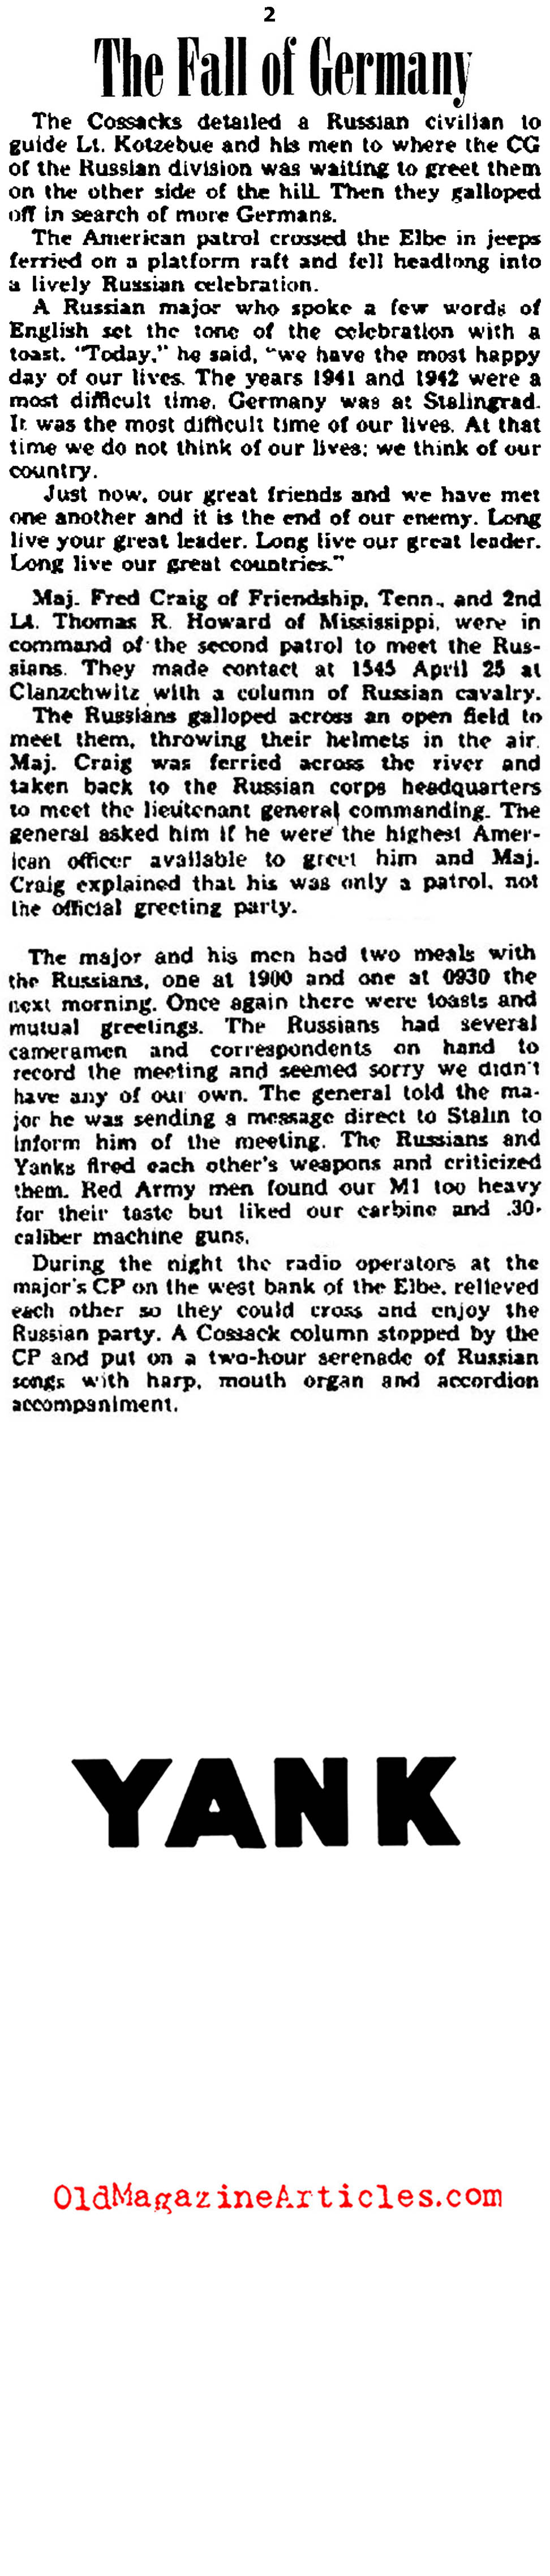 American GIs Meet the Reds on the Elbe <BR>(Newsweek & Yank Magazines, 1945)